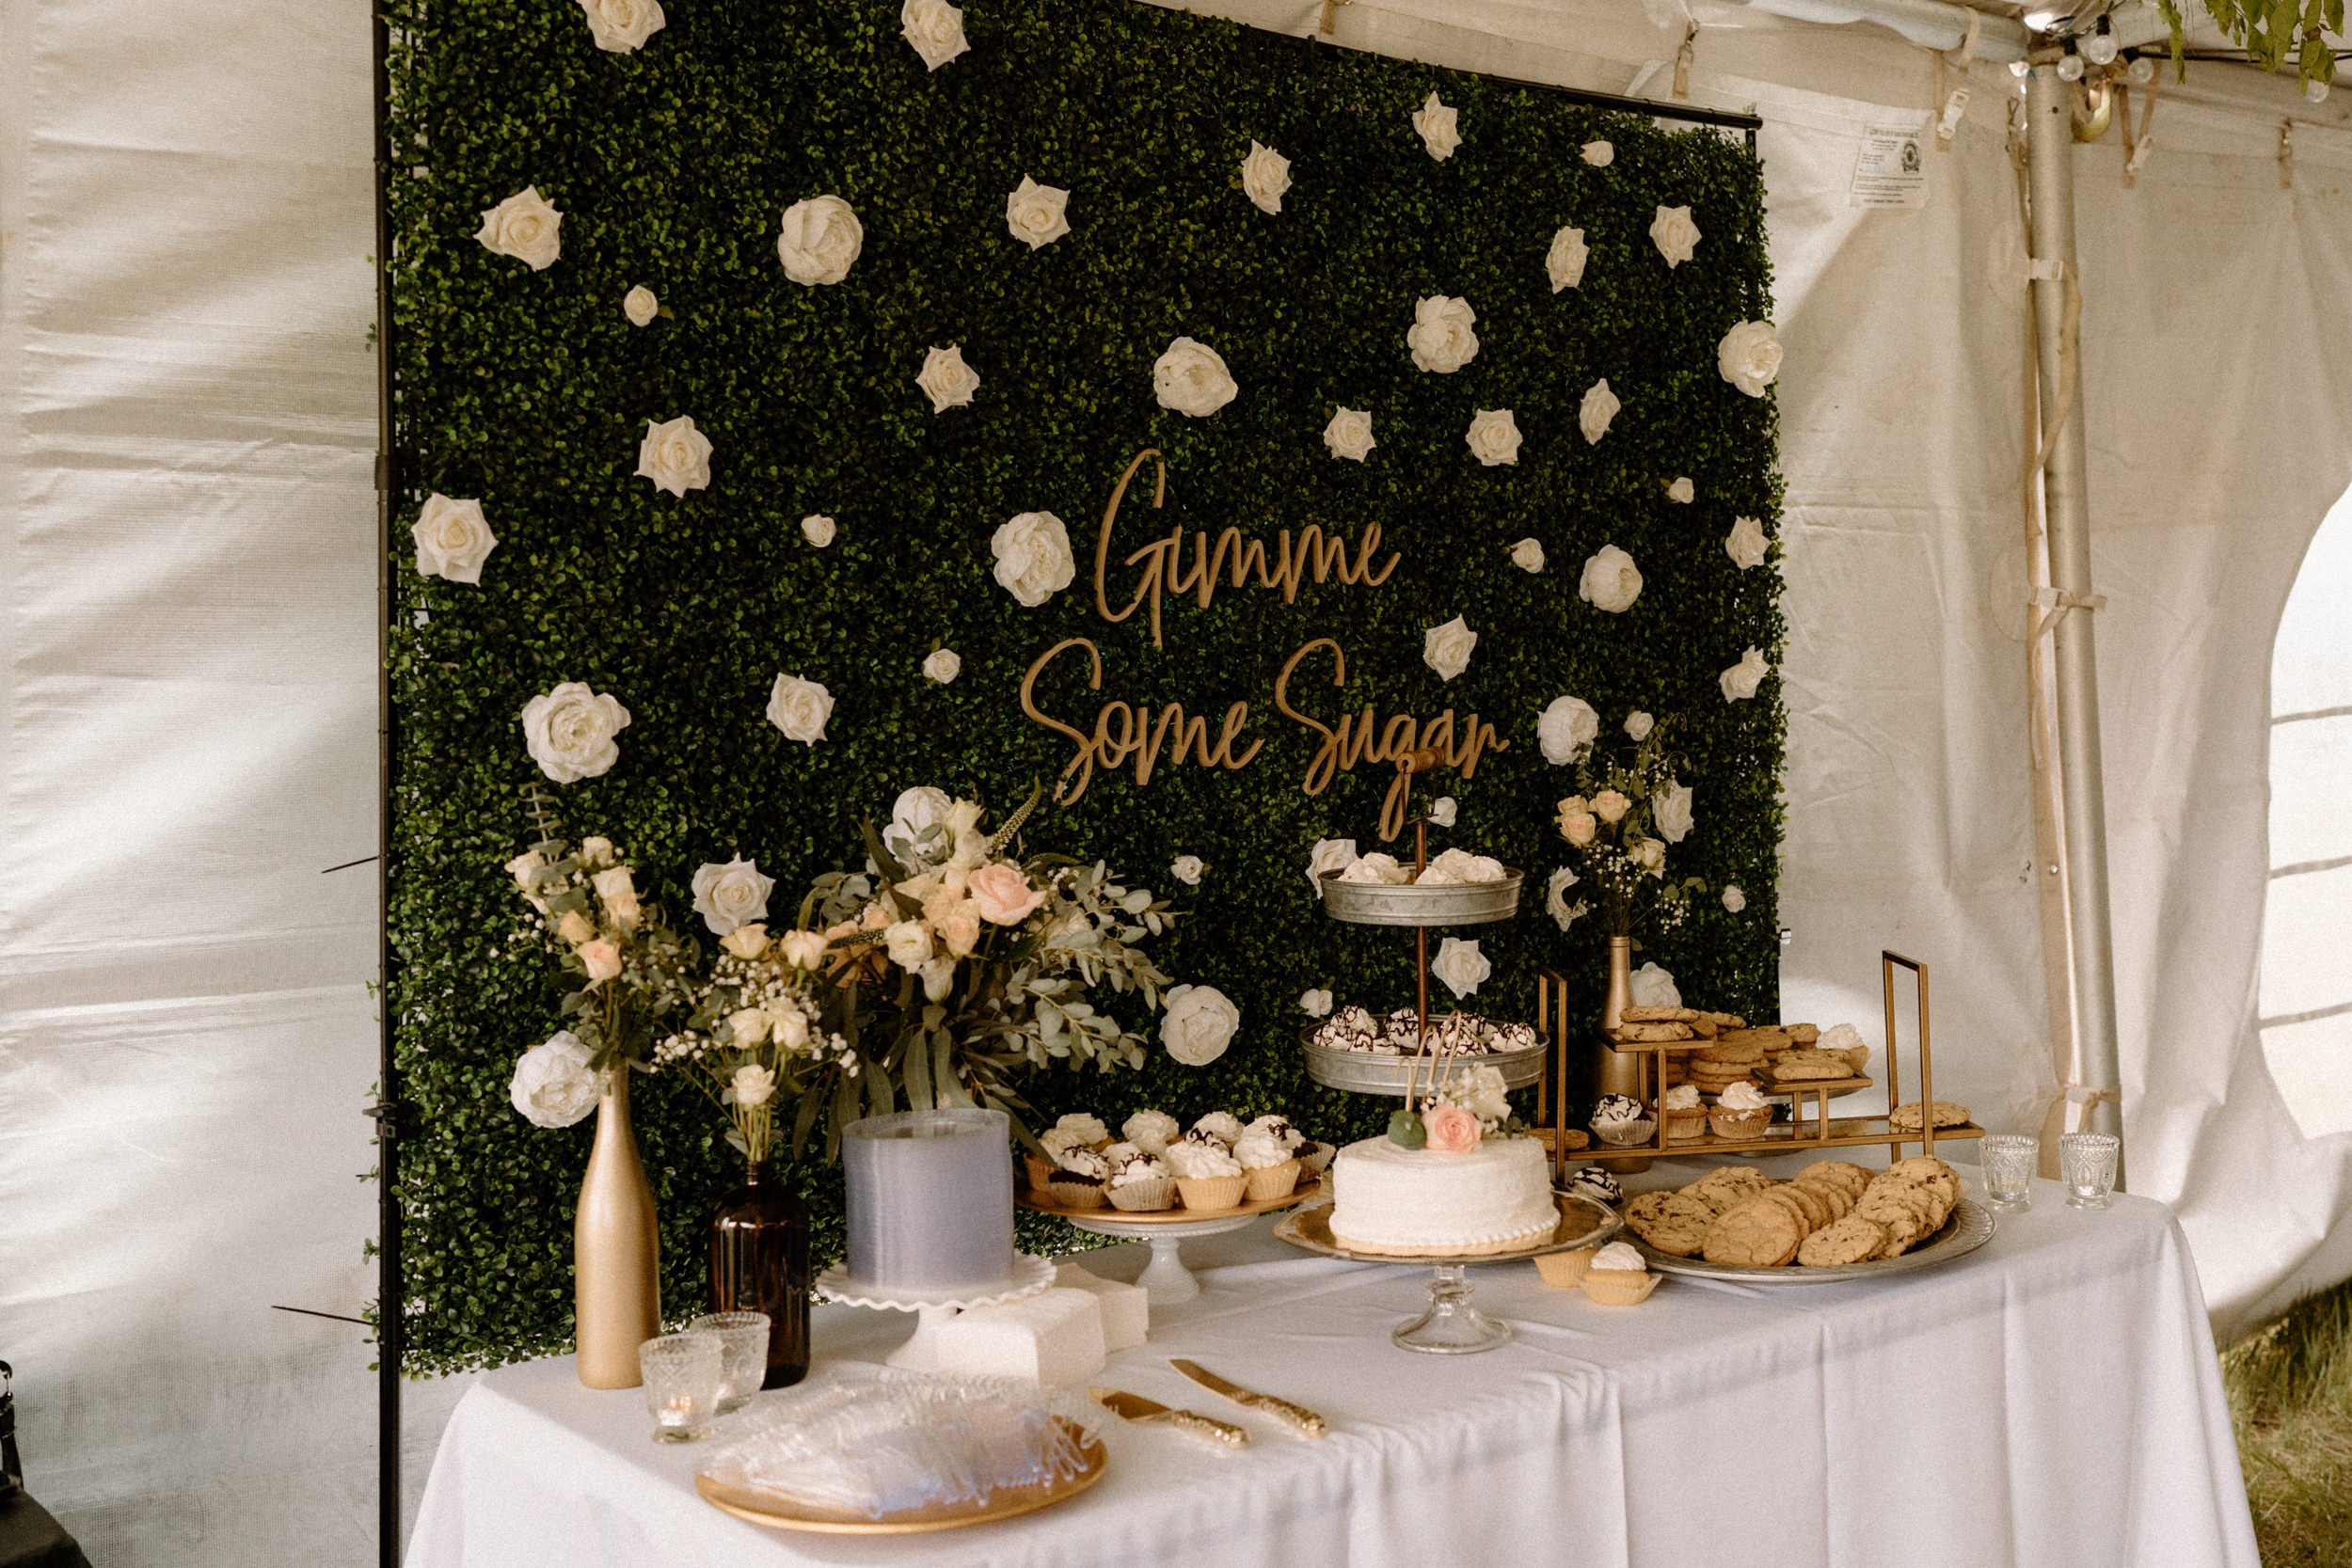 A dessert bar with a sign that reads "Gimme Some Sugar"